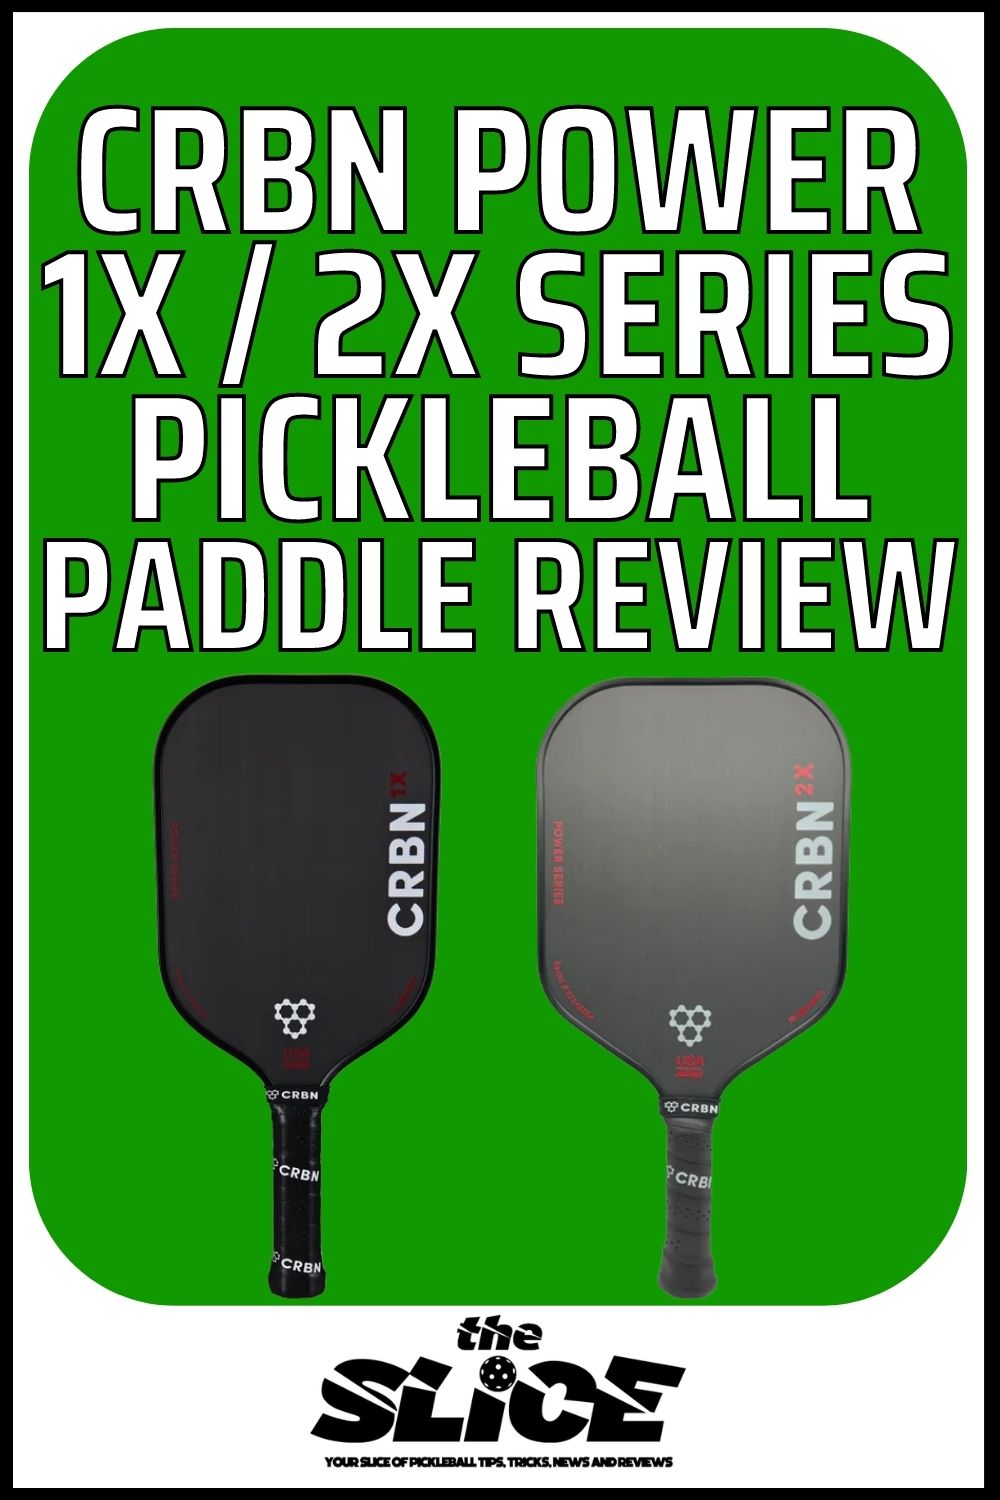 CRBN Power Series Paddle Review